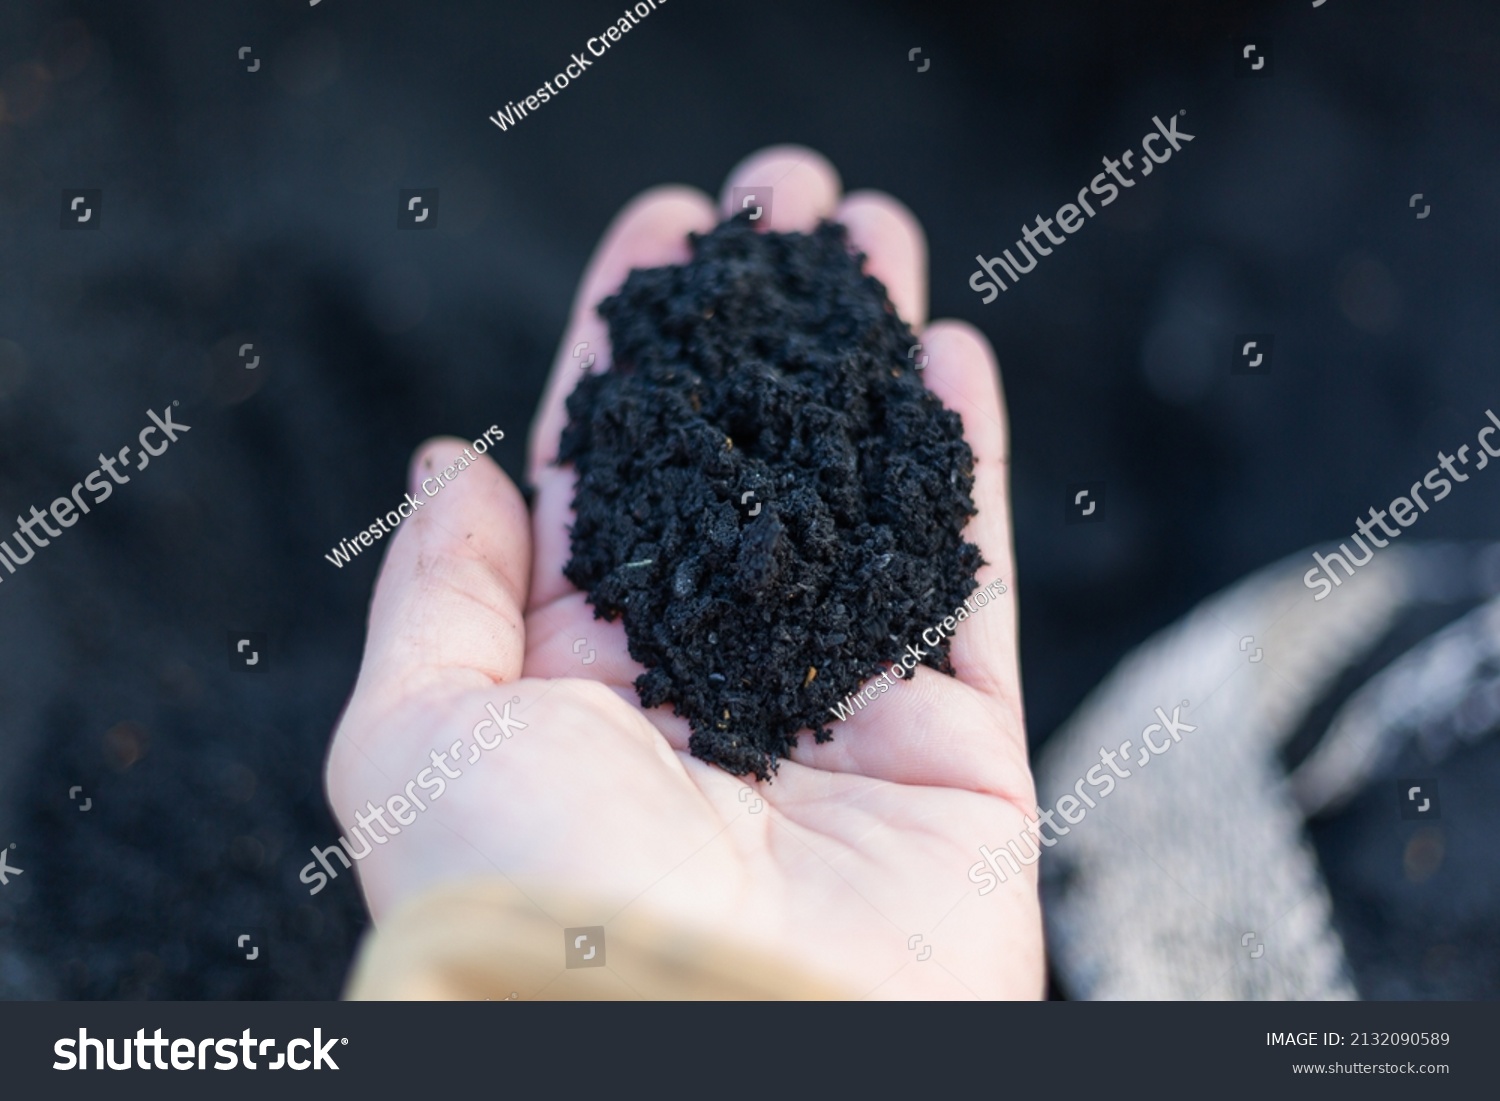 A top view of black Organic composted soil amendments in a hand #2132090589